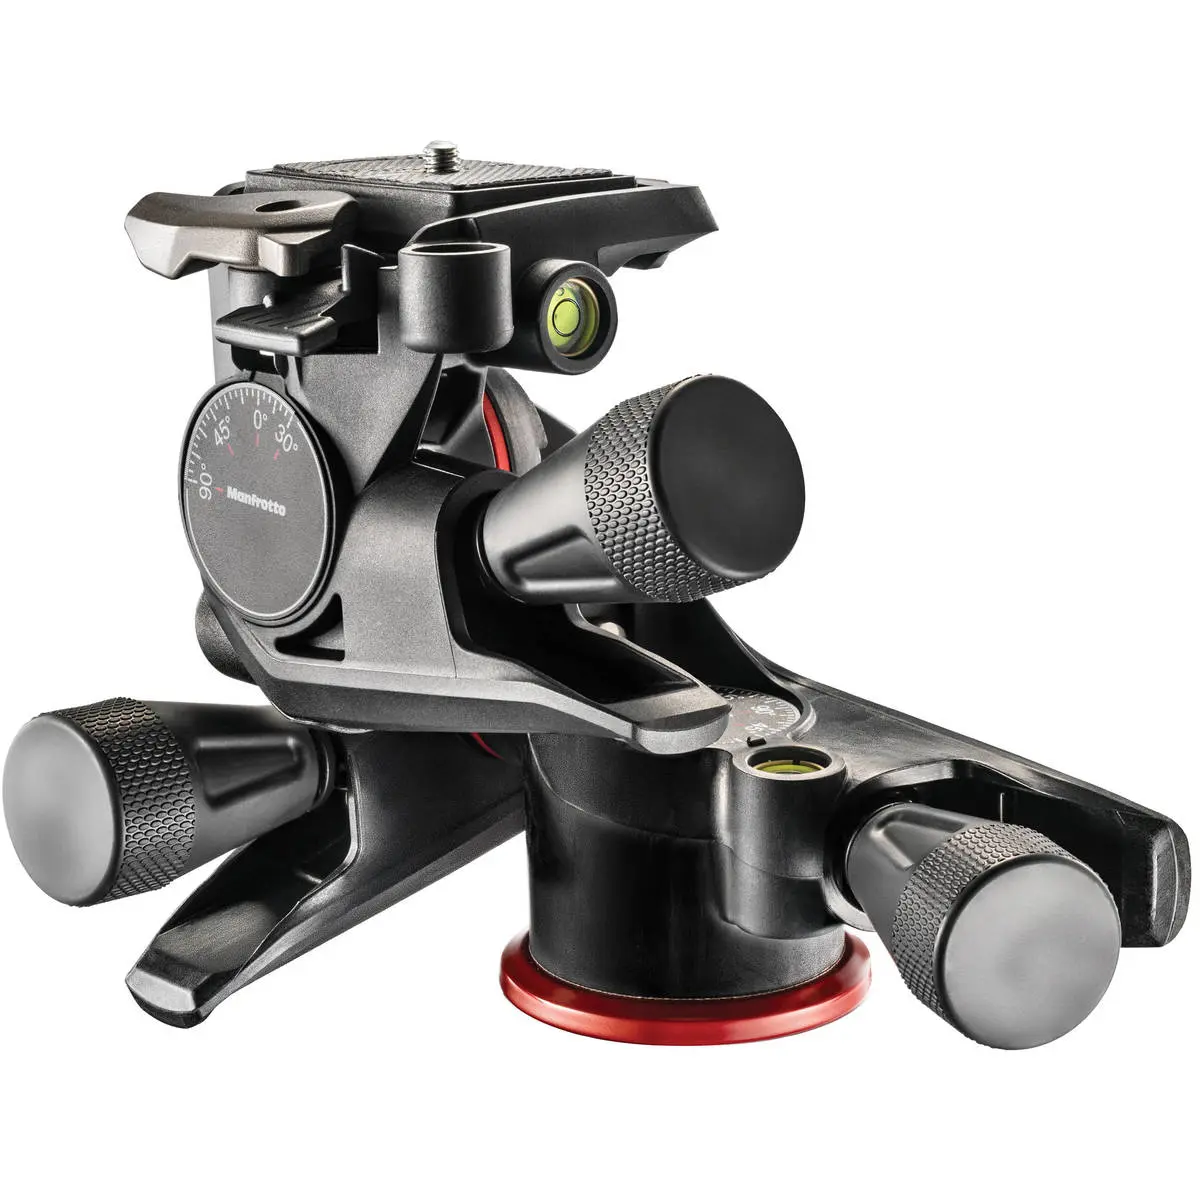 Manfrotto Xpro Geared 3-Way Head MHXPRO-3WG